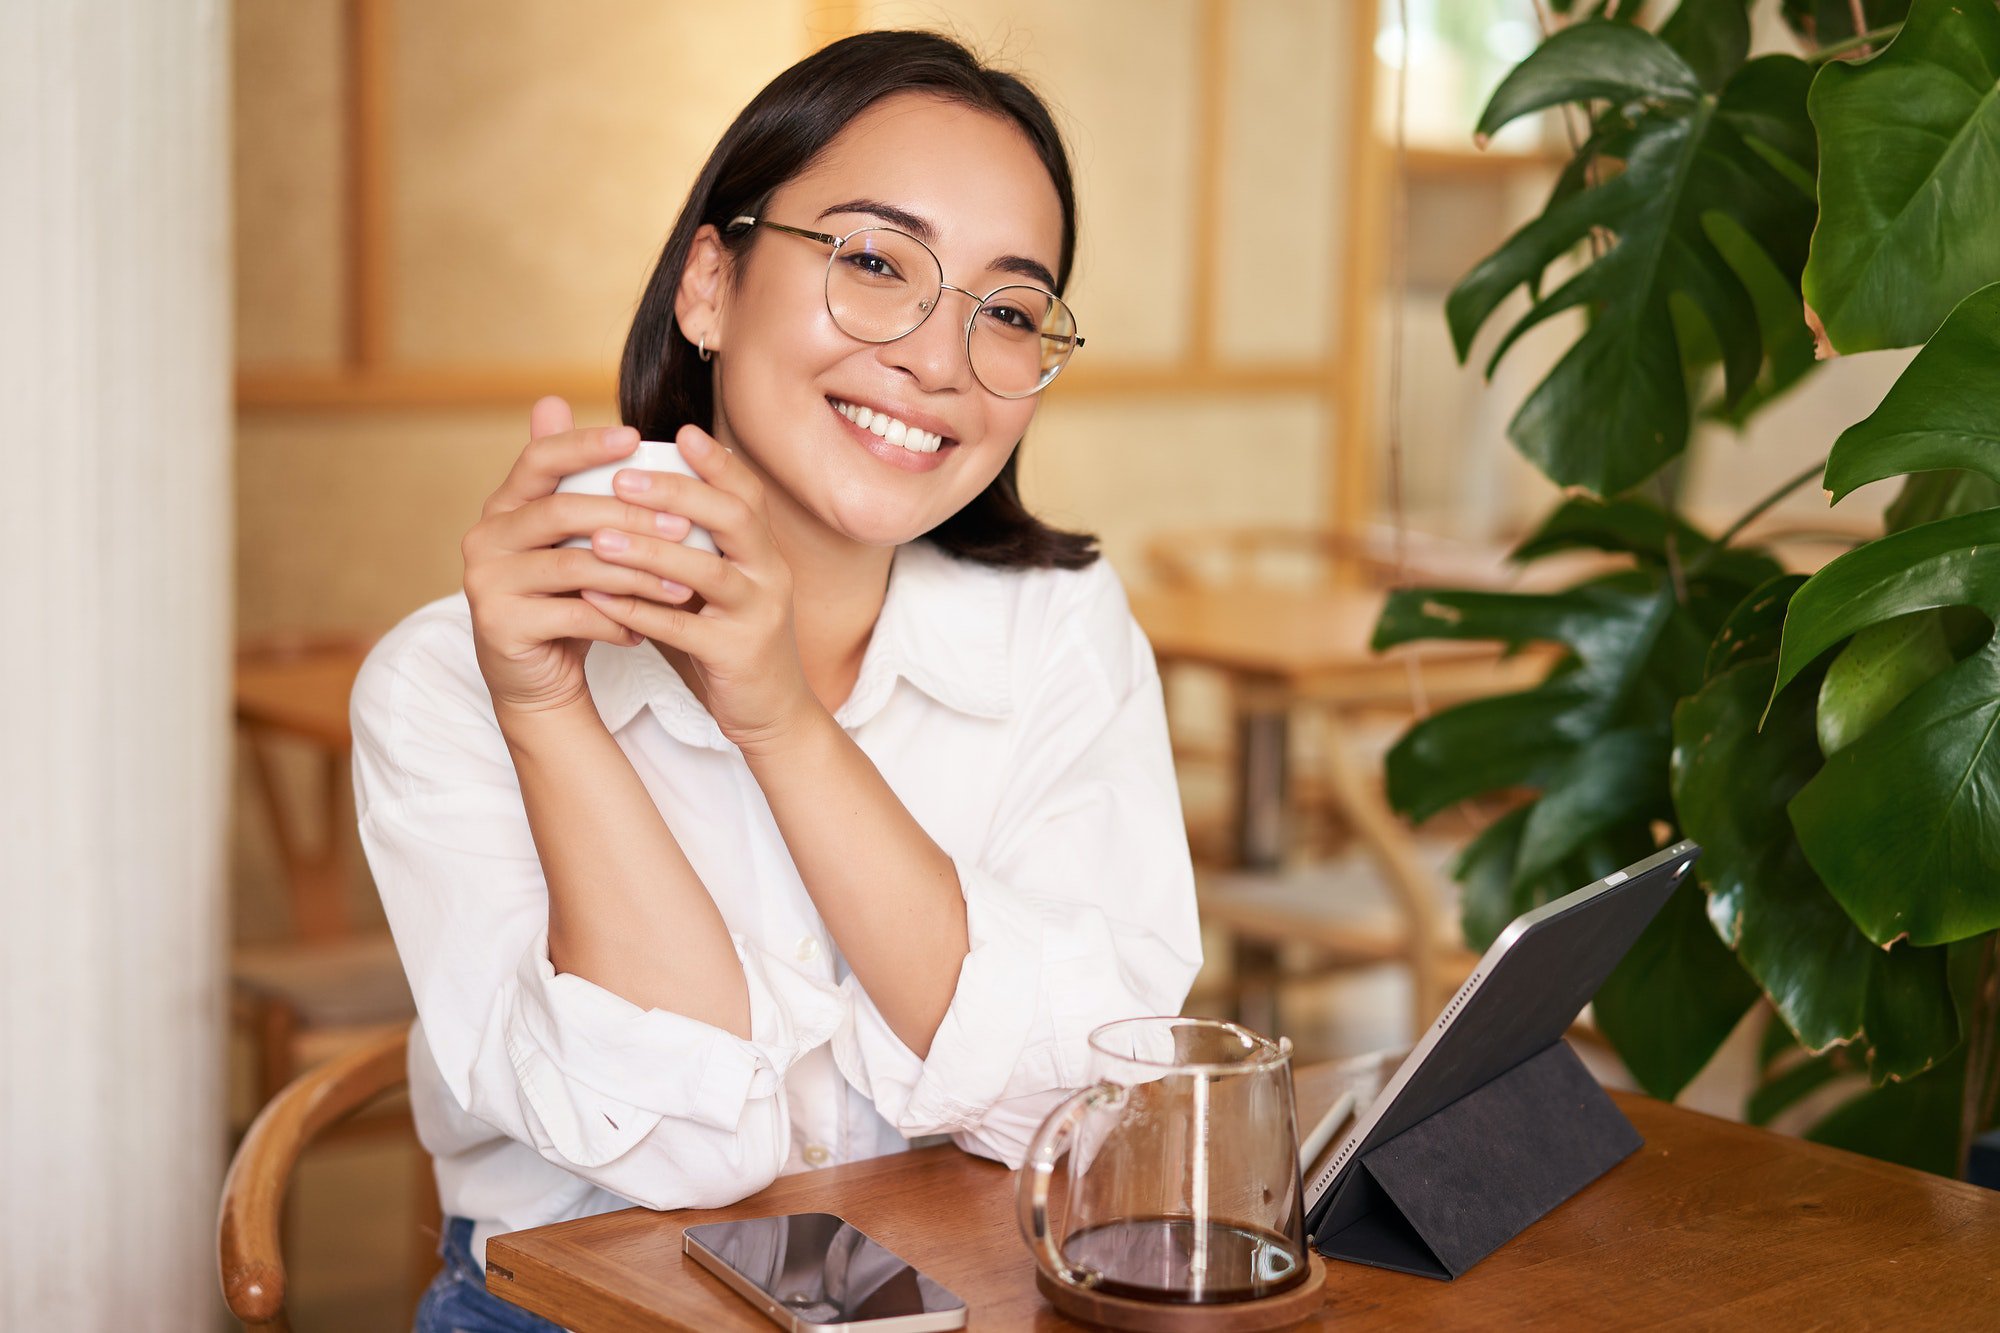 Smiling asian girl in glasses, woman working on remote, drinking coffee and using tablet